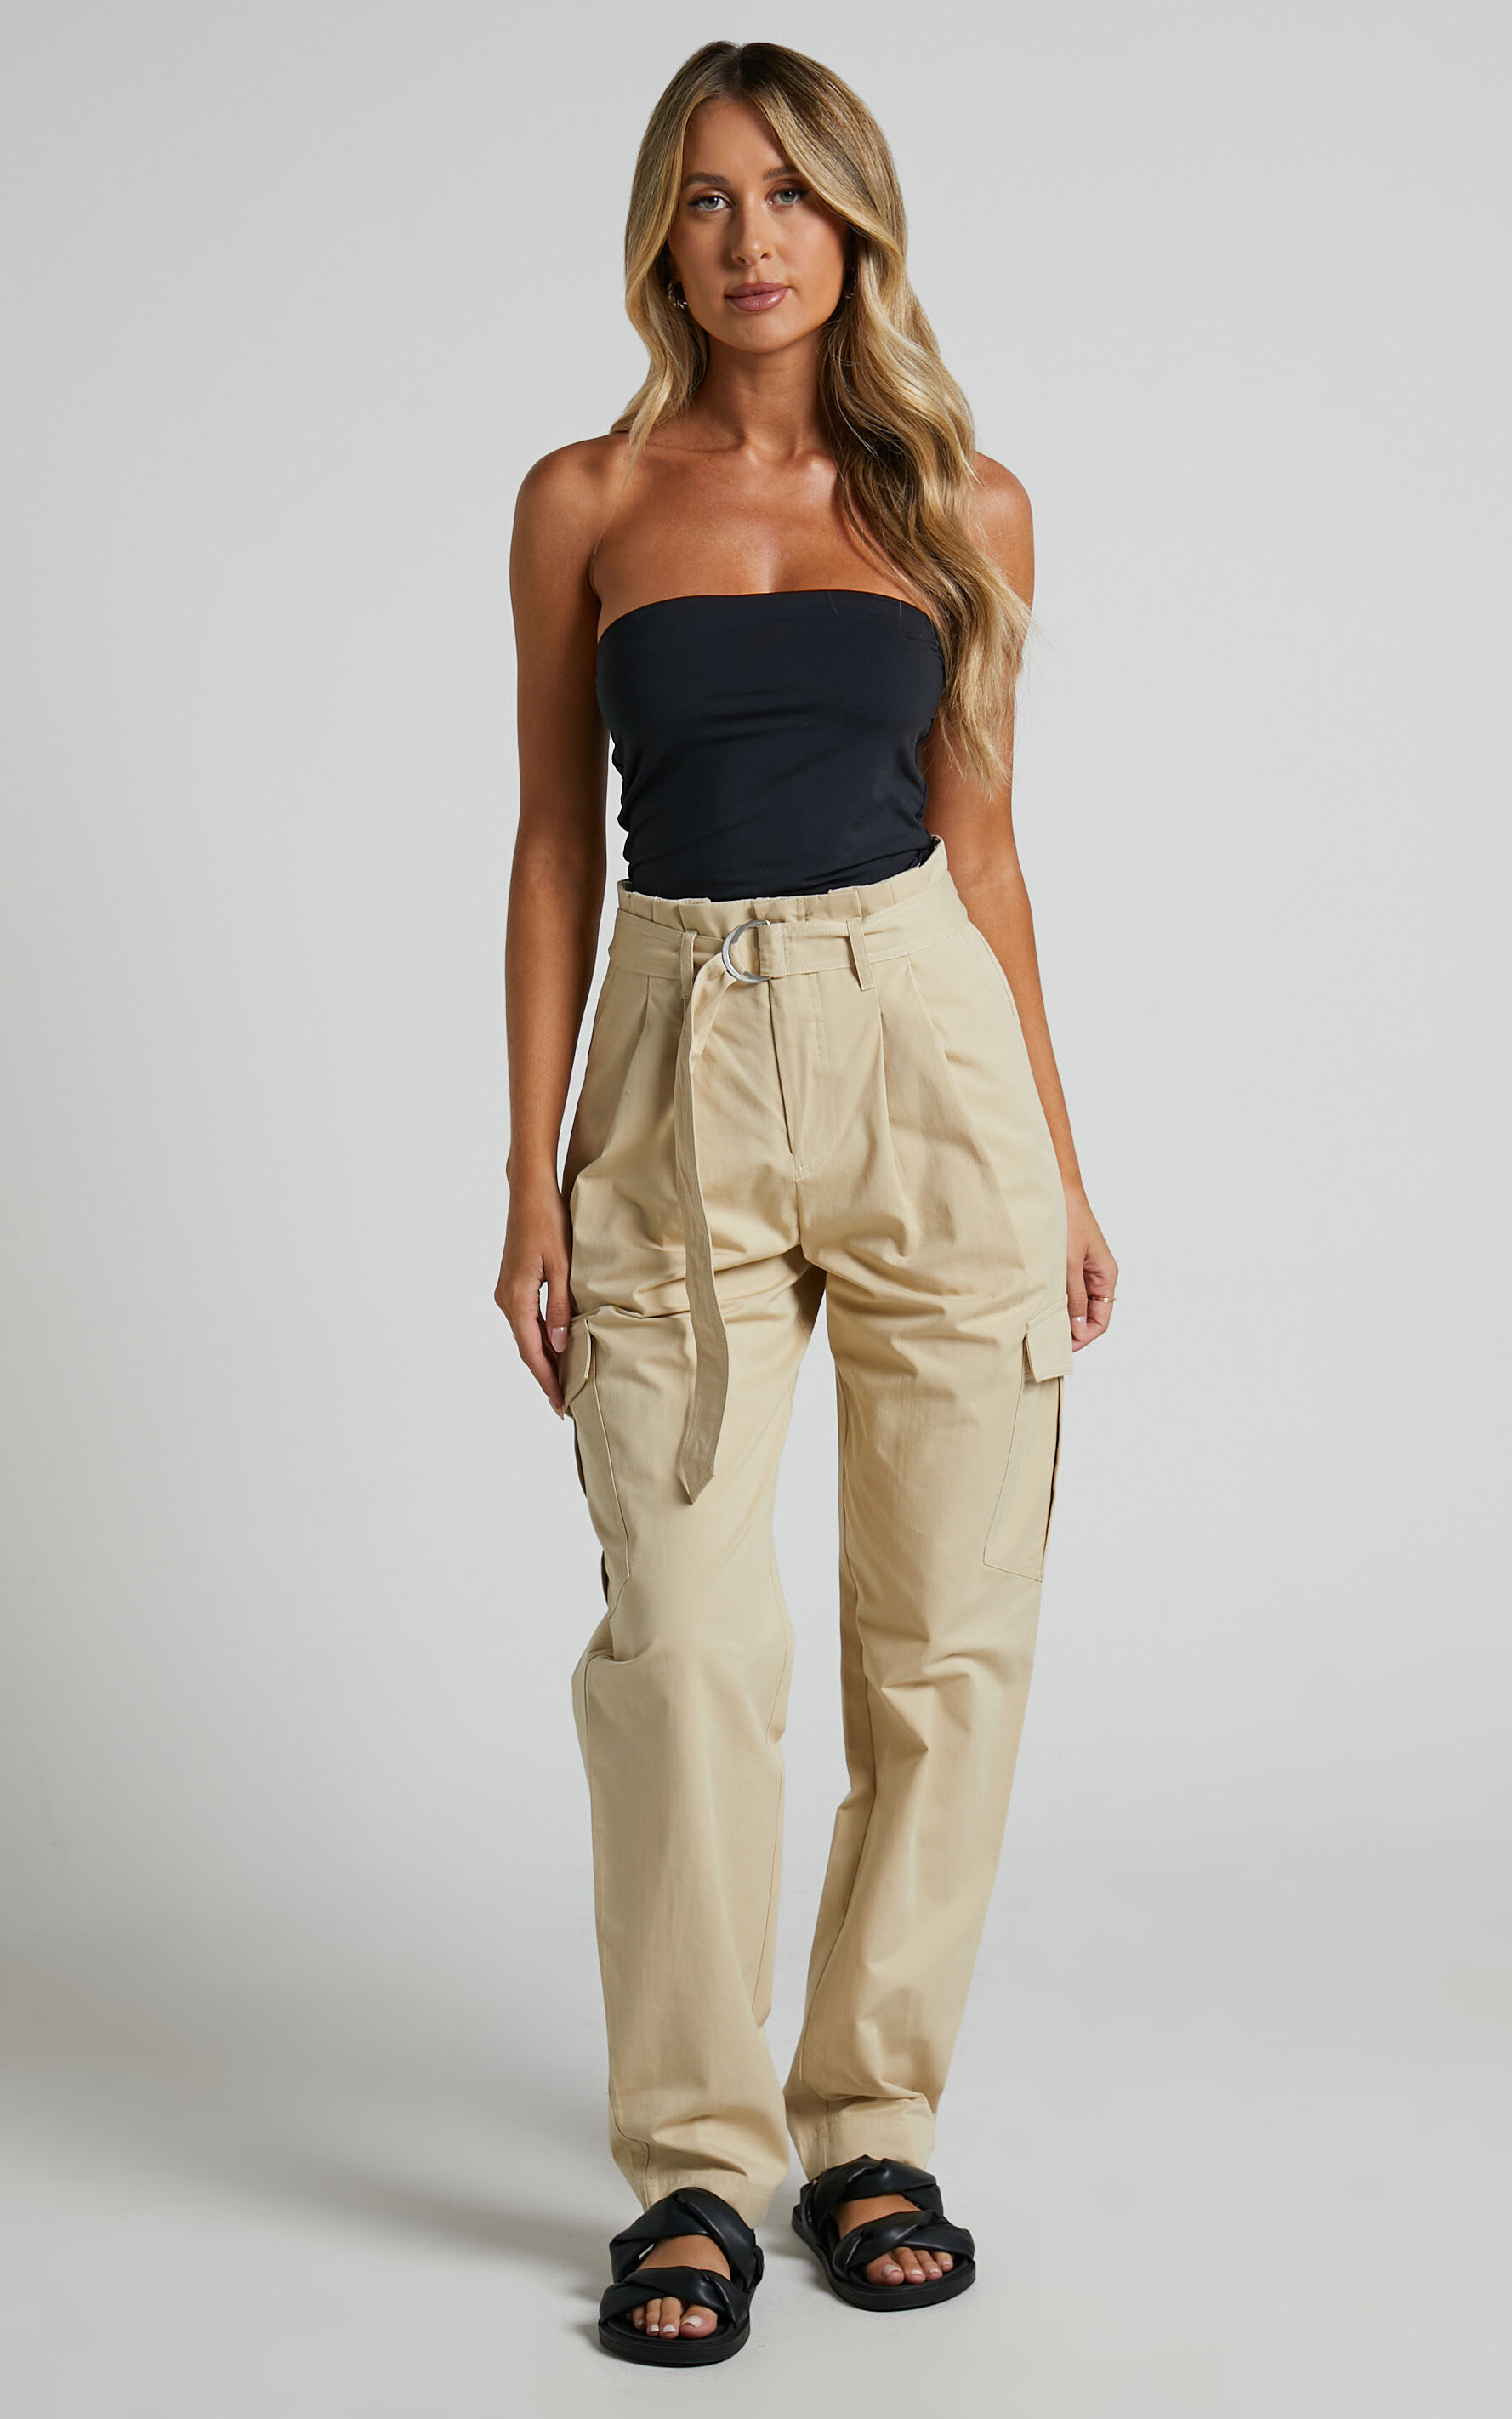 Chaslien Pants - High Waisted Paper Bag Belted Cargo Pants in